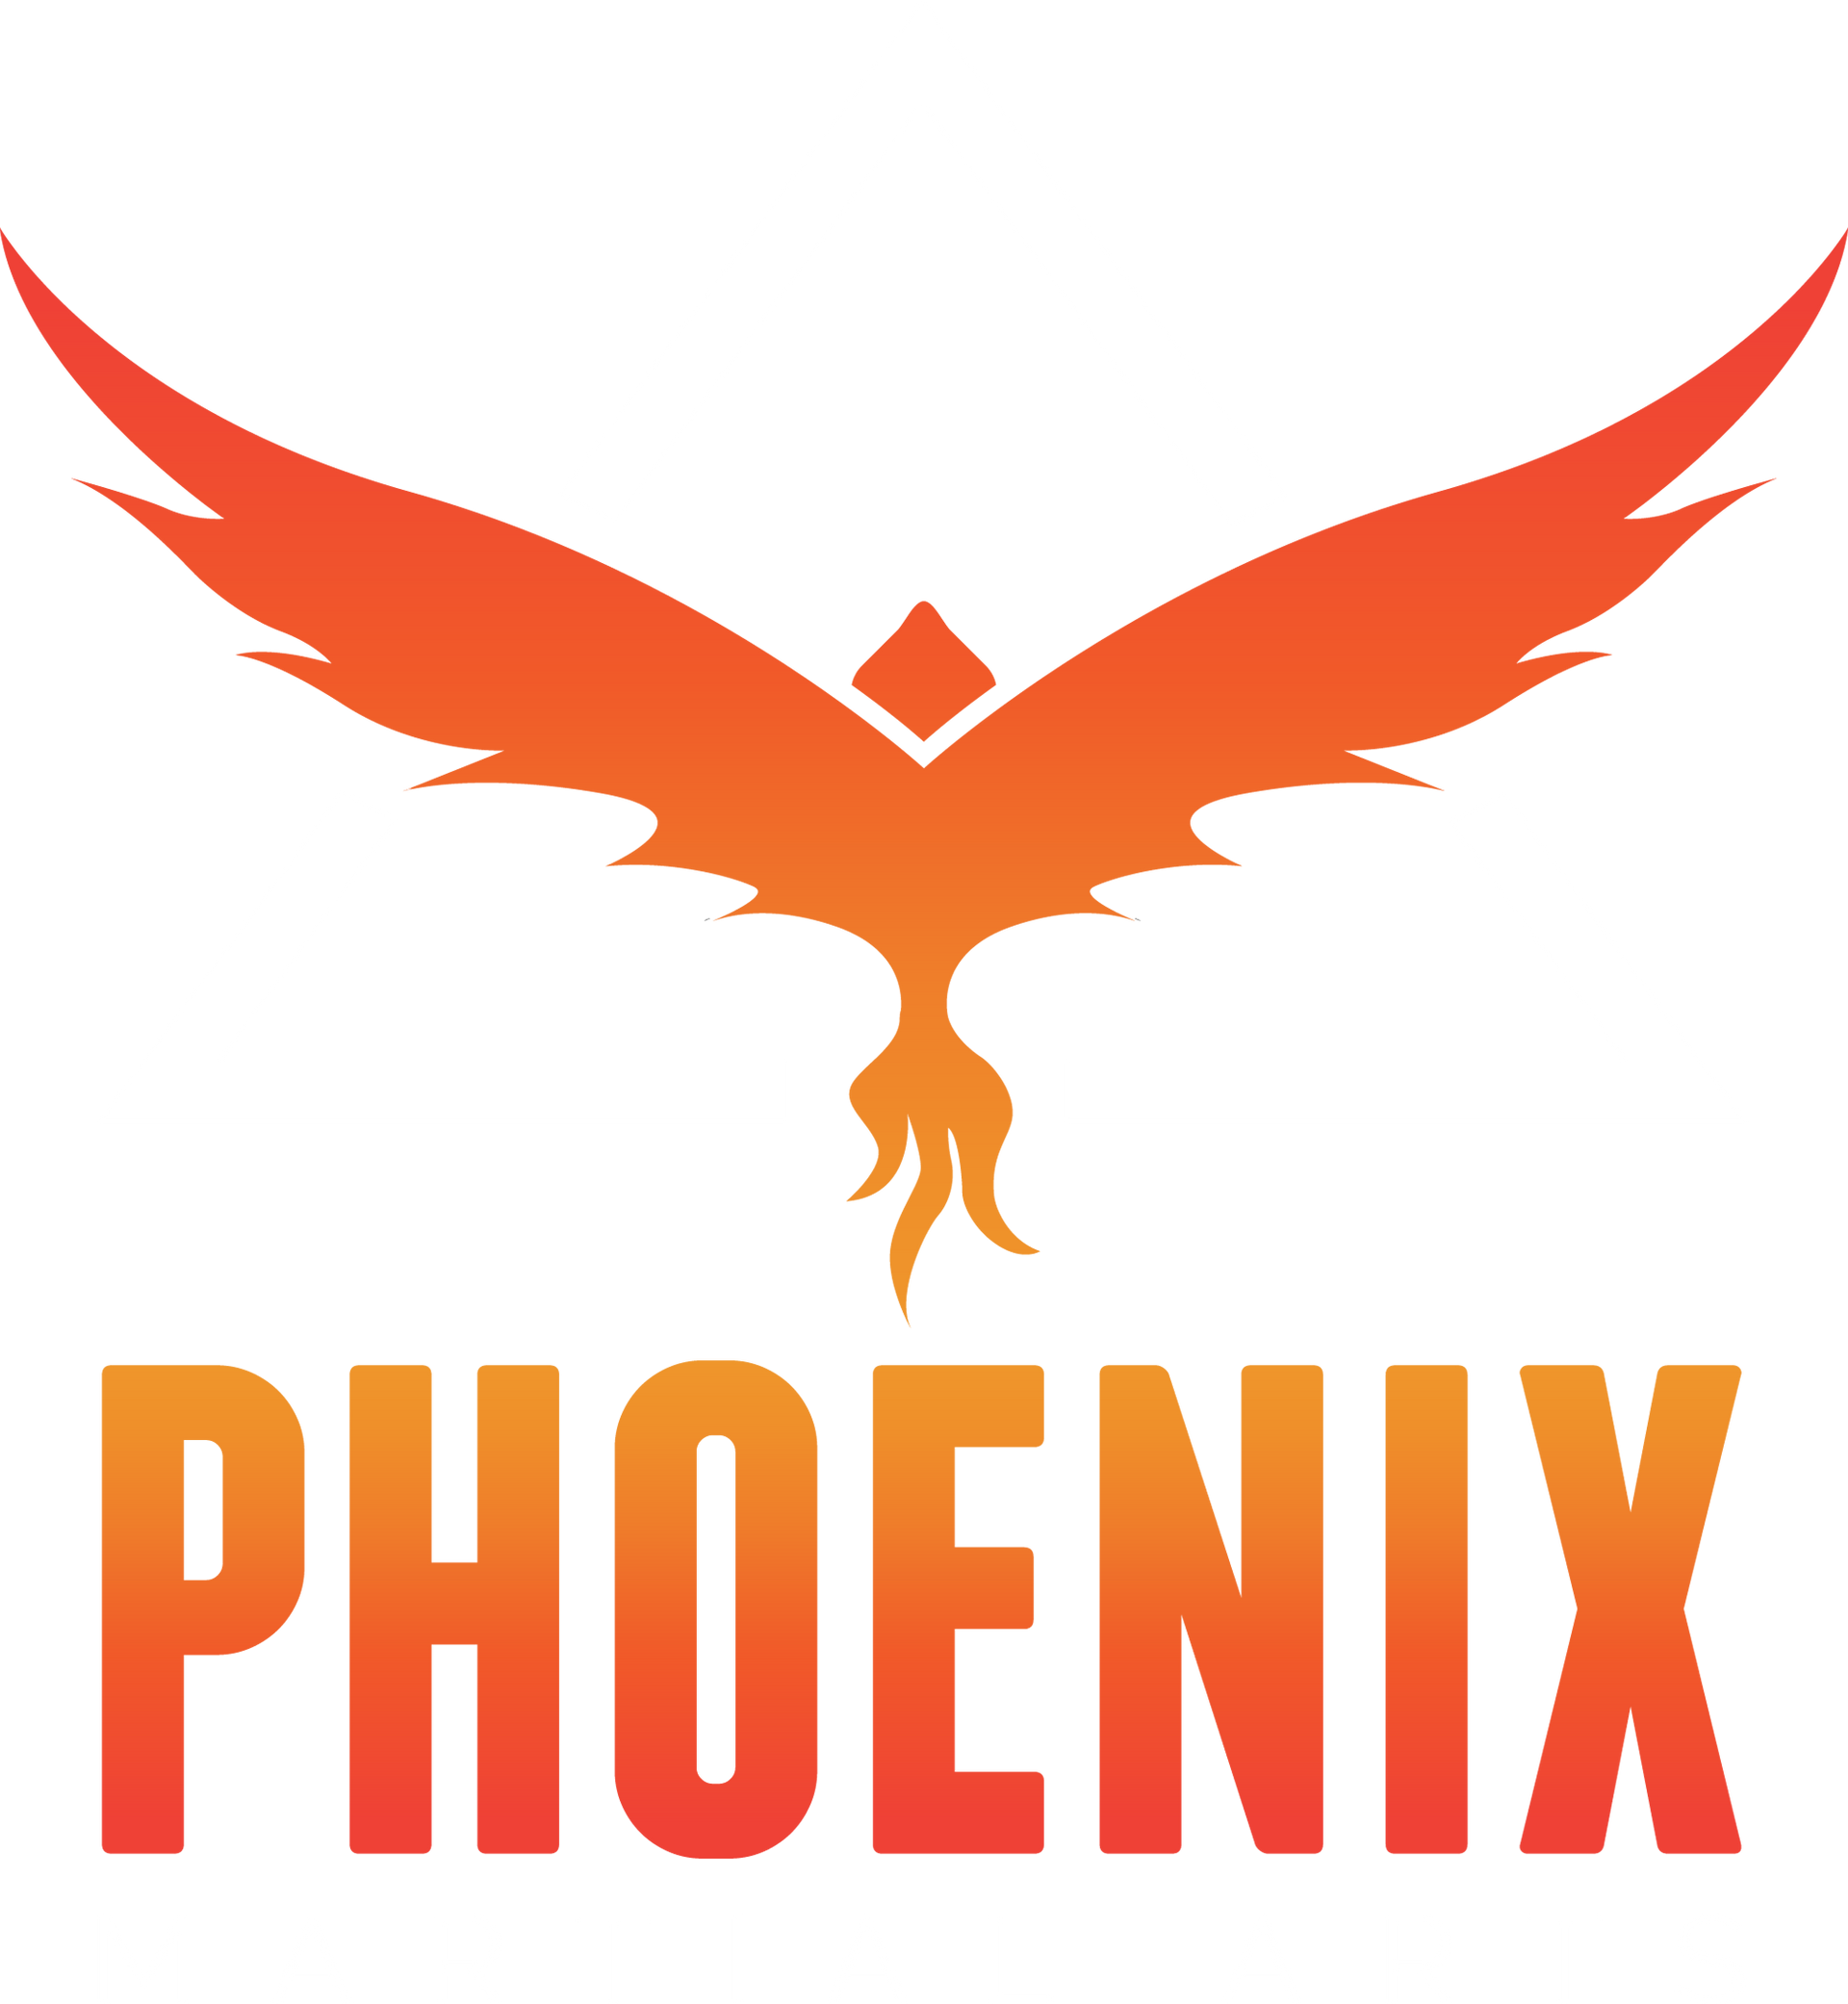 A logo for phoenix with a phoenix in the center